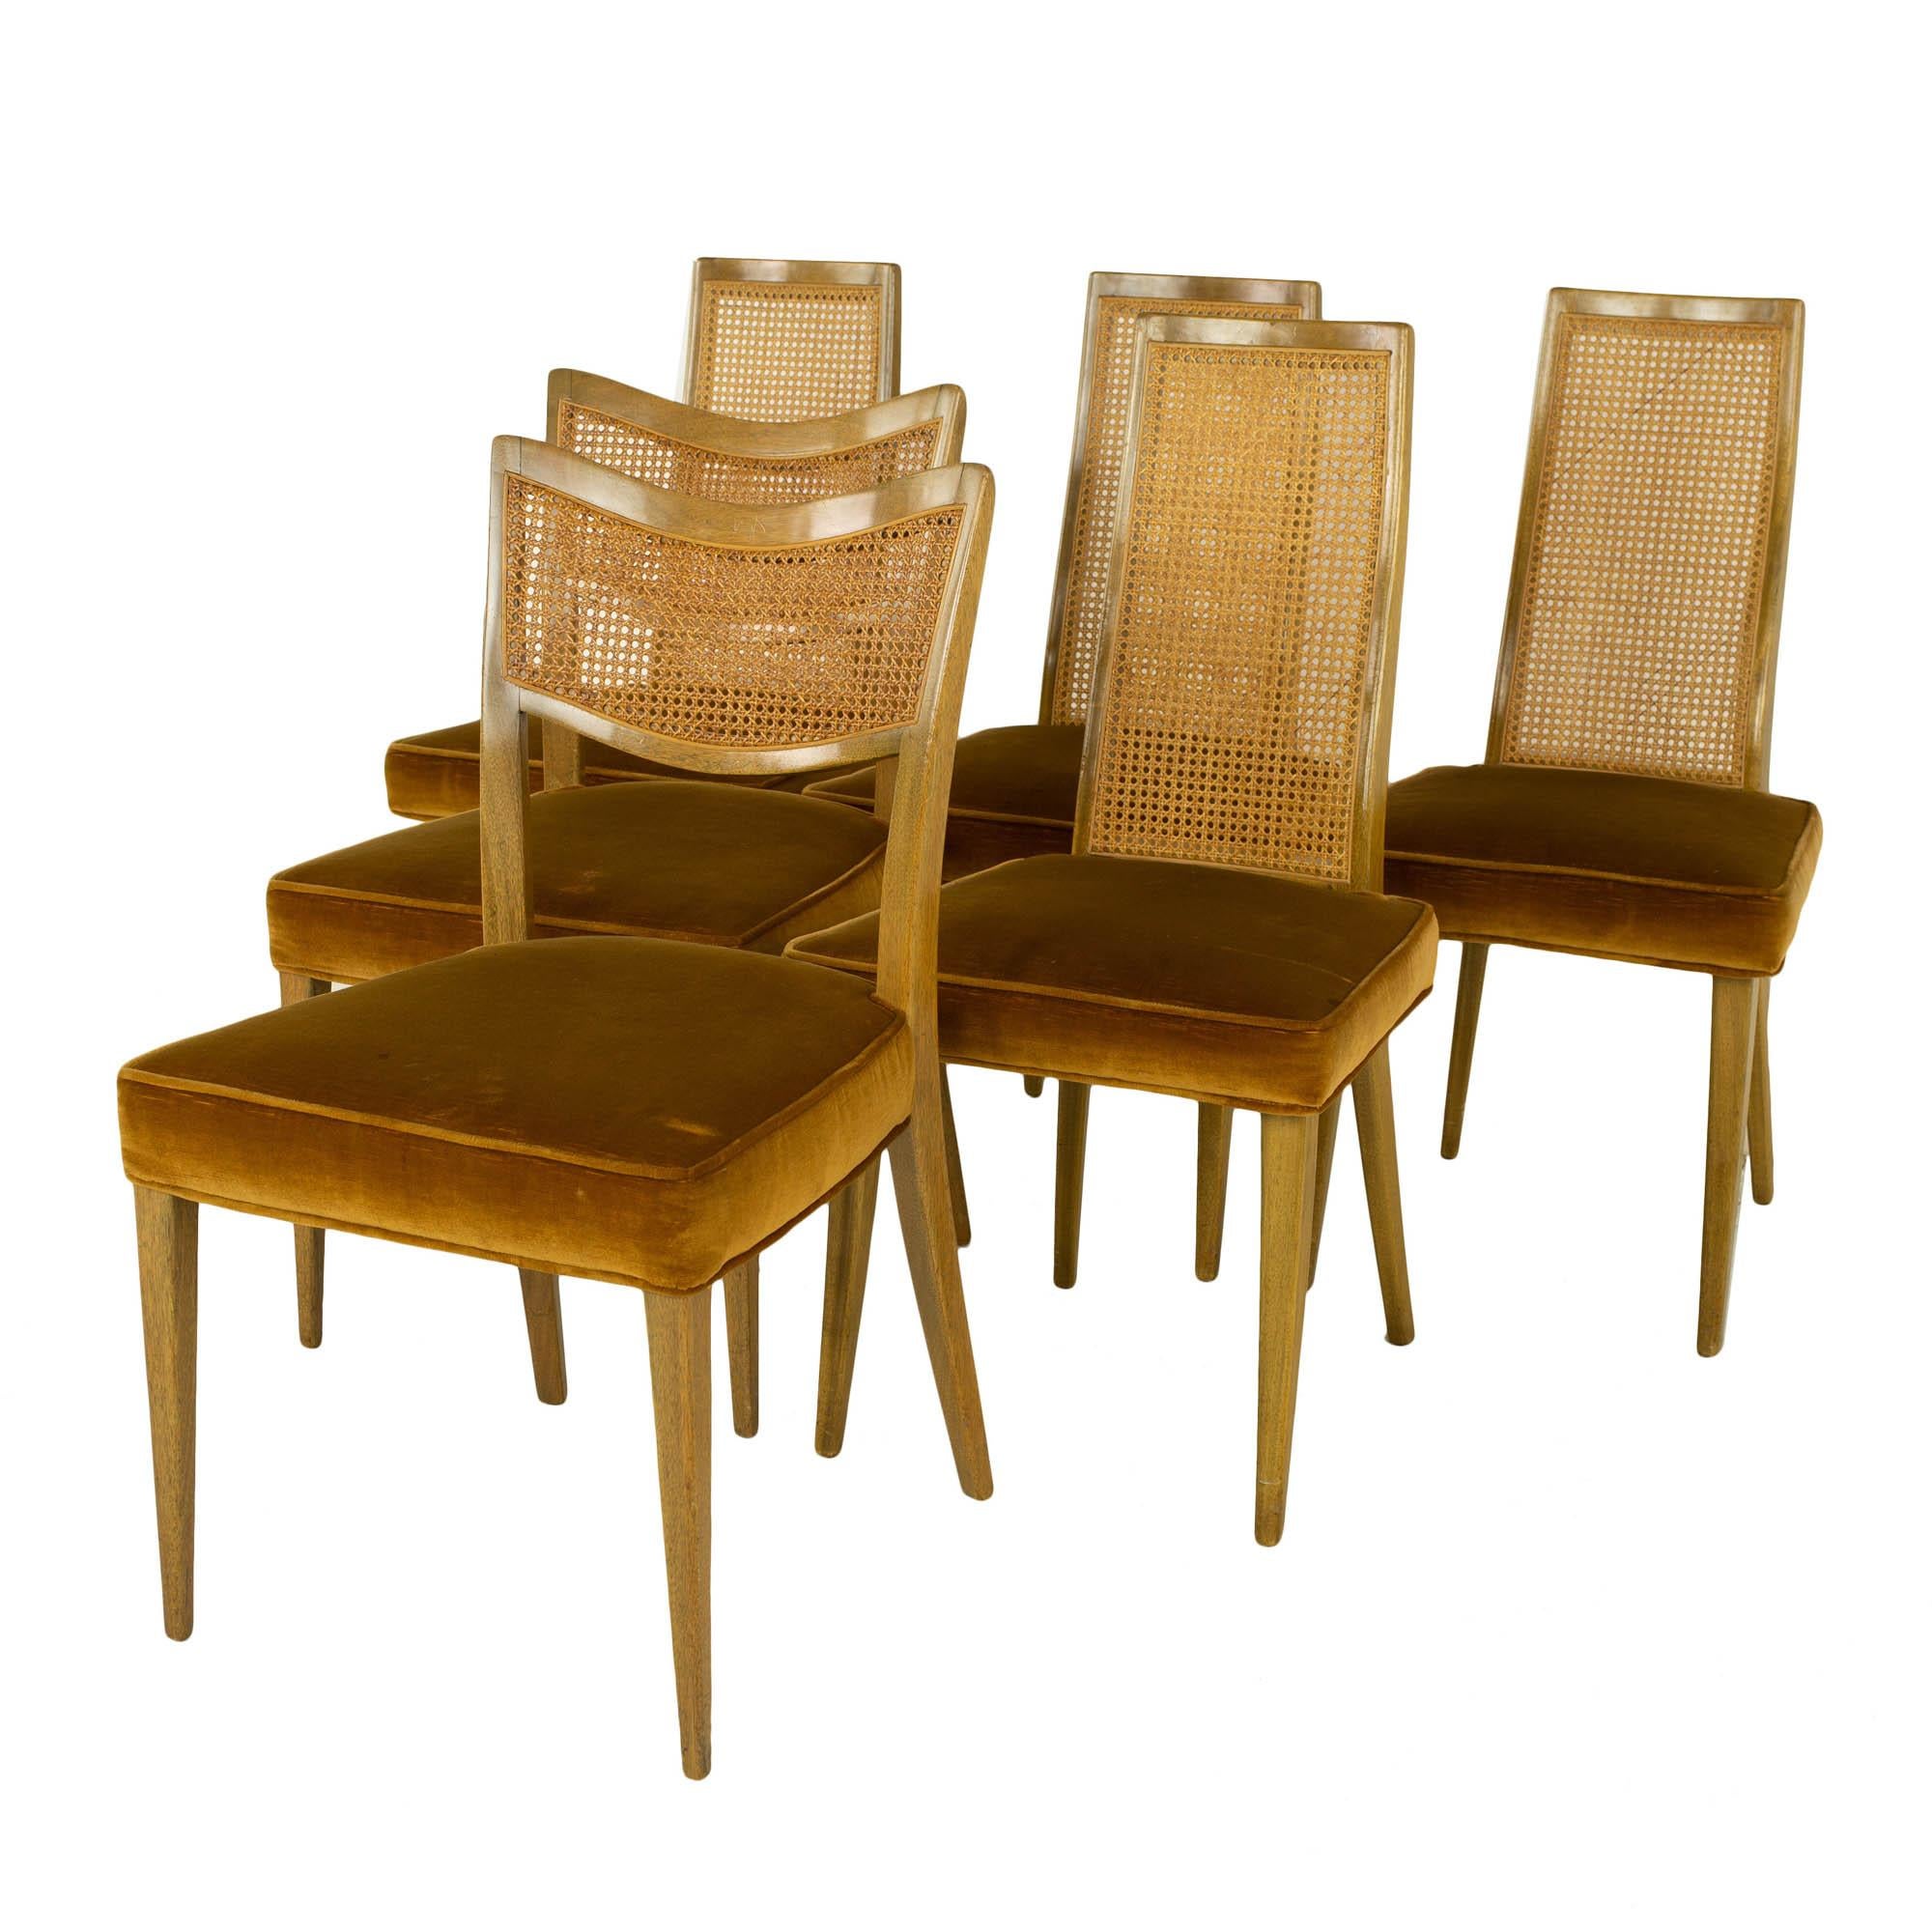 Mid-Century Modern Draft Harvey Probber MCM Bleached Mahogany and Cane Dining Chairs, Set of 6